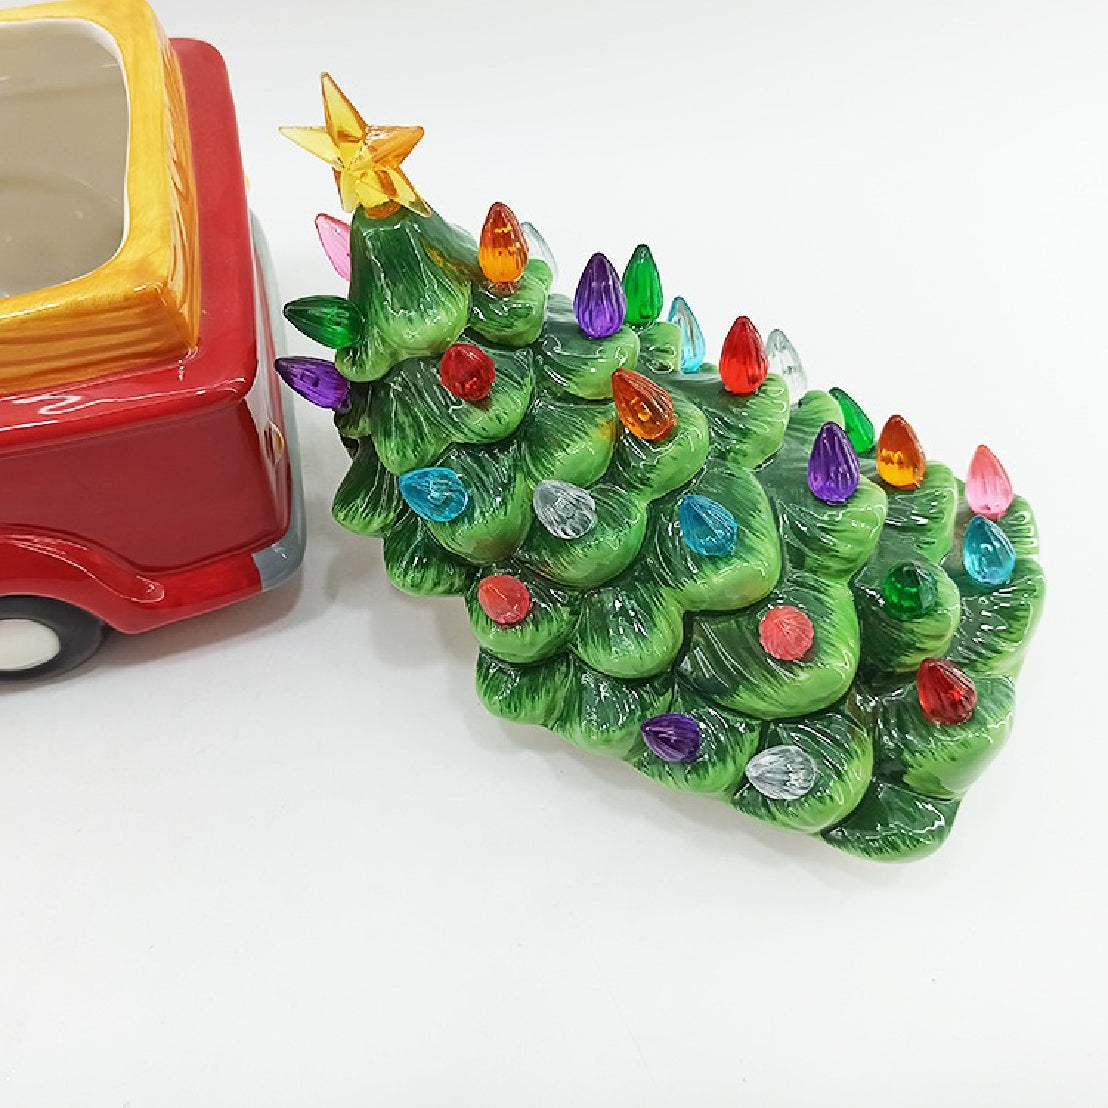 Vintage Truck with Christmas Tree Cookie Jar, 10.63 x 5.7 x 8.46 Inches, American Hand-Painted Ceramic Christmas Cookie Candy Tea Jar, Cute Kitchen Countertop Storage Jar